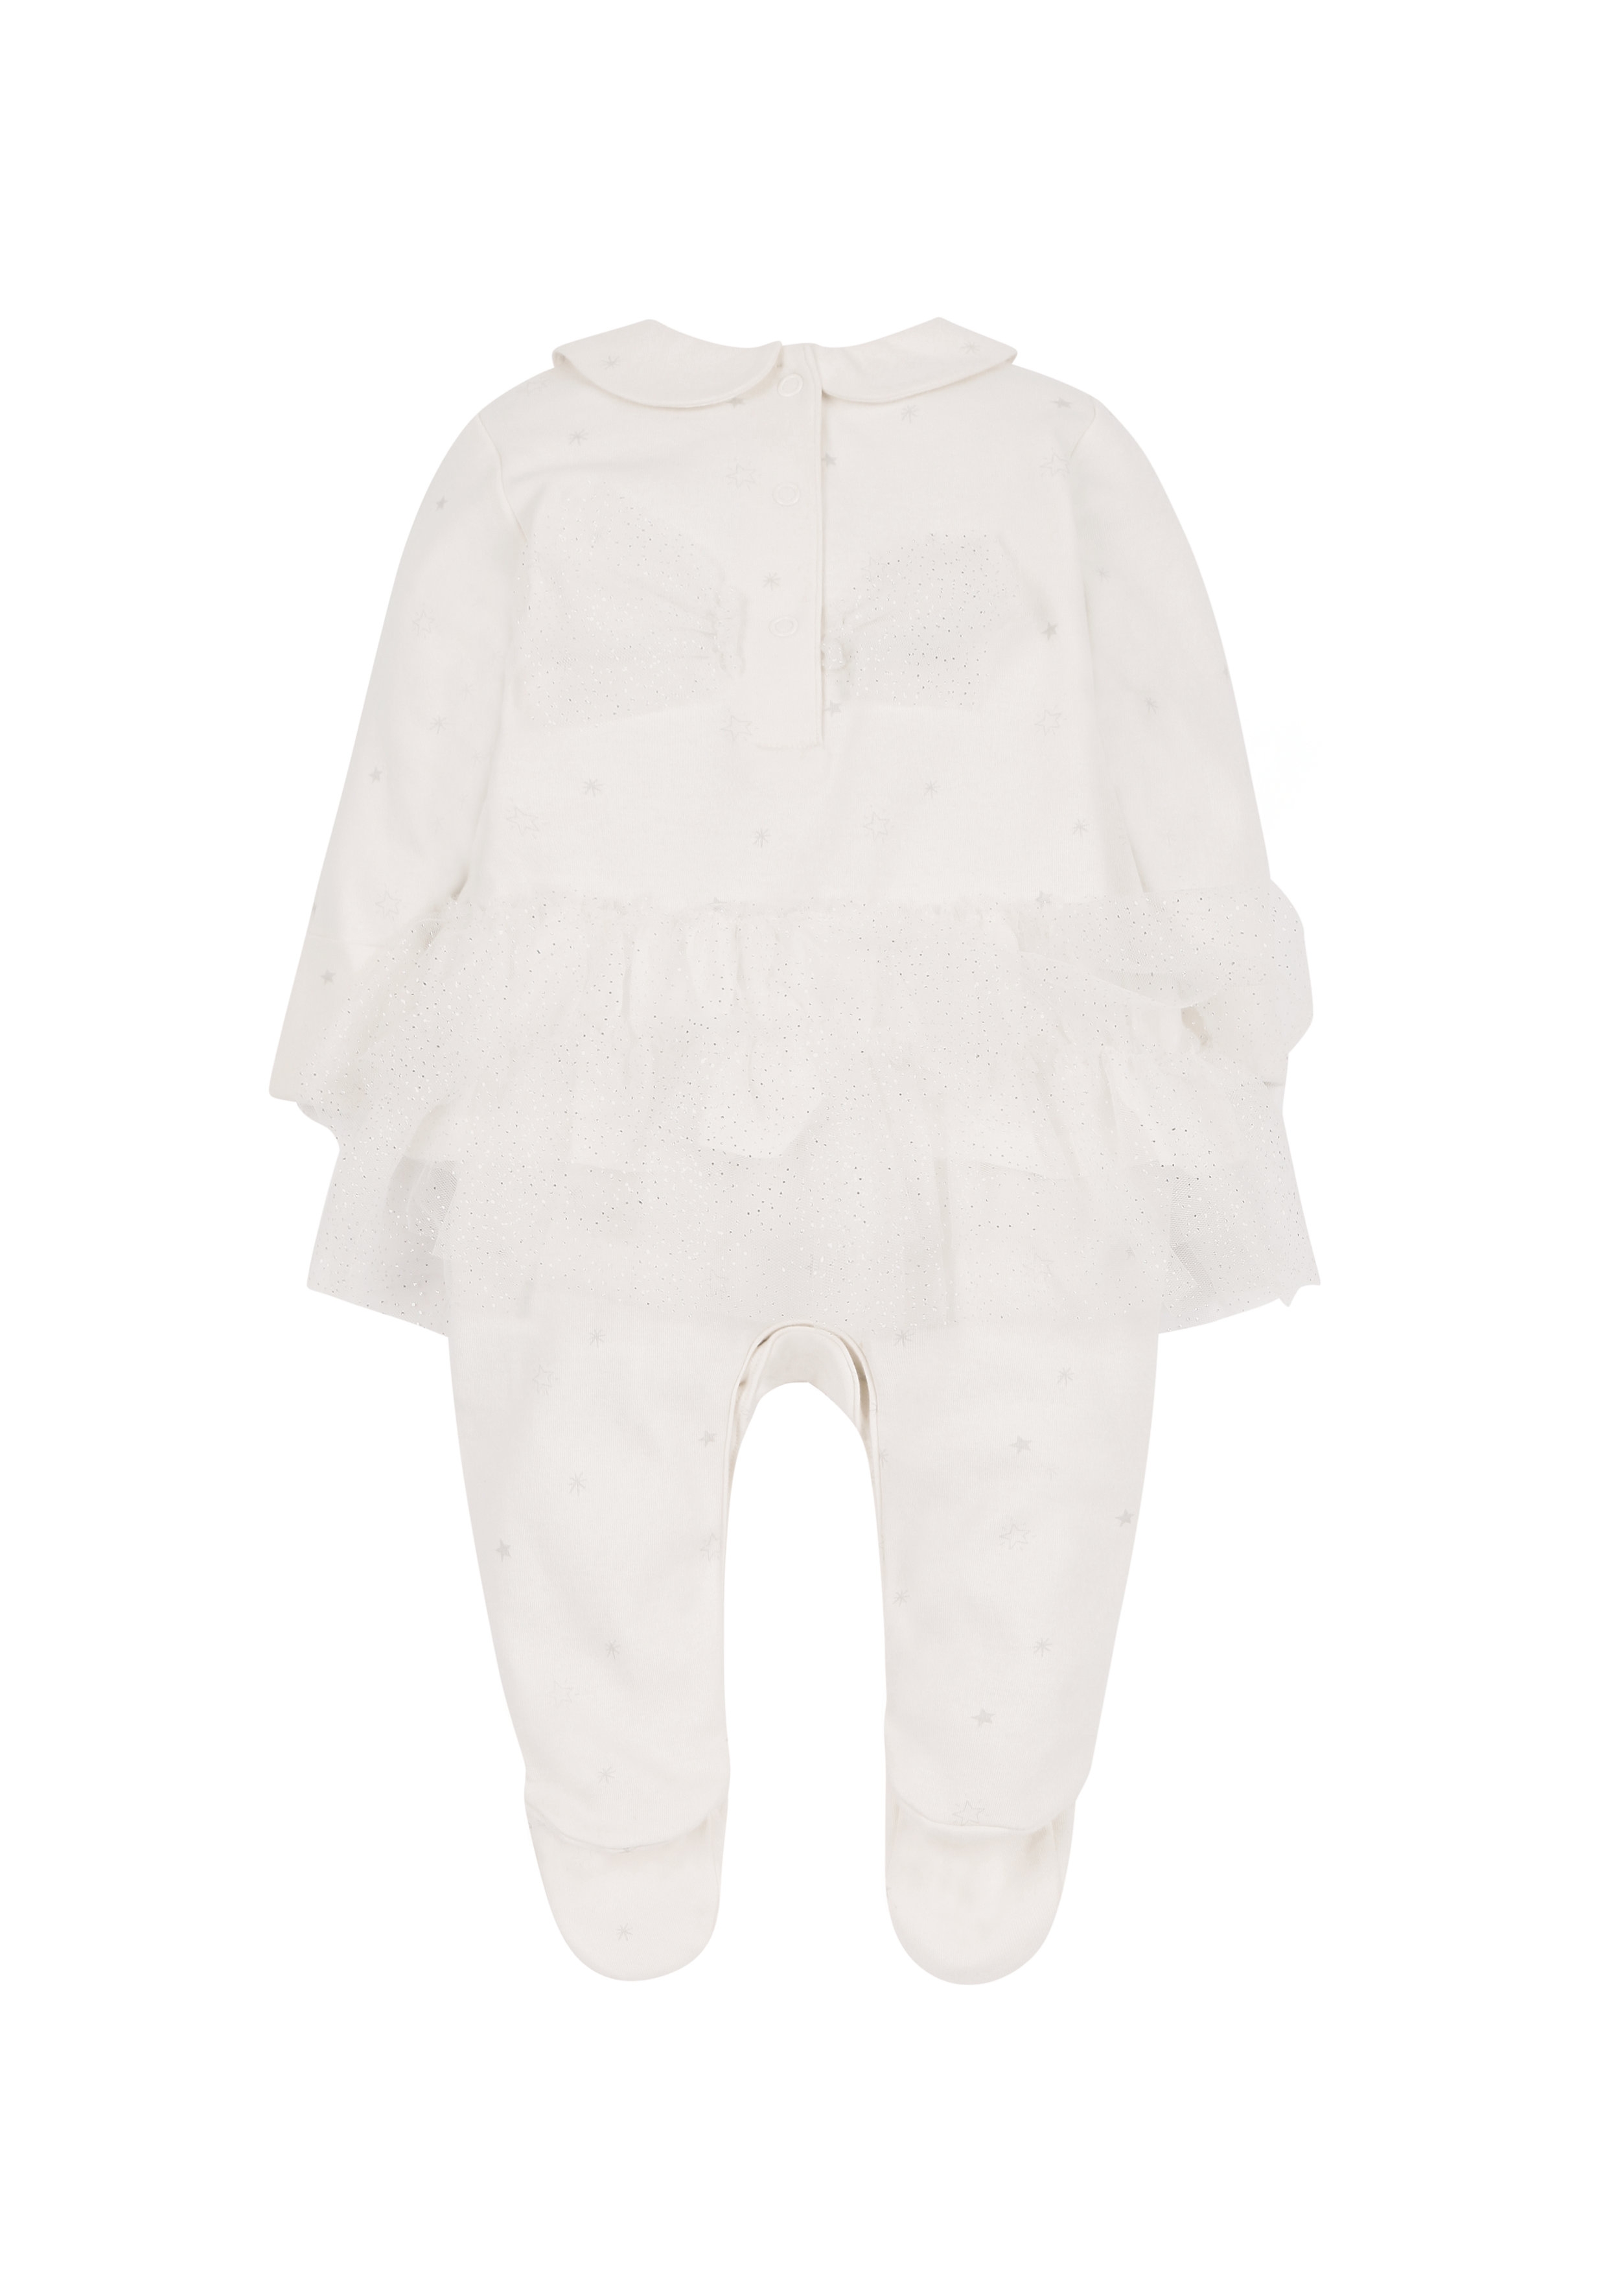 Mothercare | Girls Full Sleeves Frock Style Romper Text Print - Cream 1